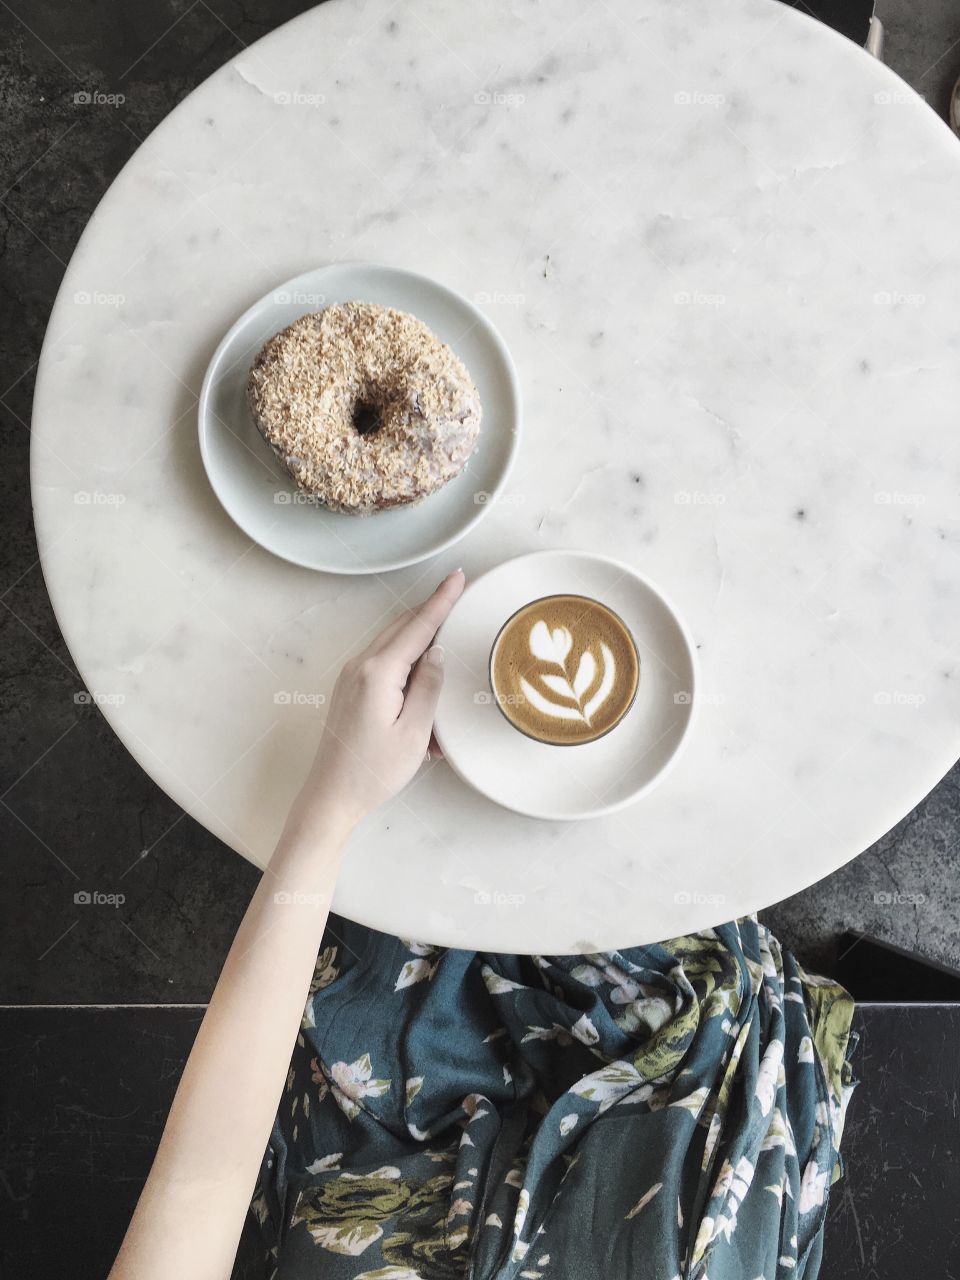 coconut donut and cortado from happy bones cafe in new york city